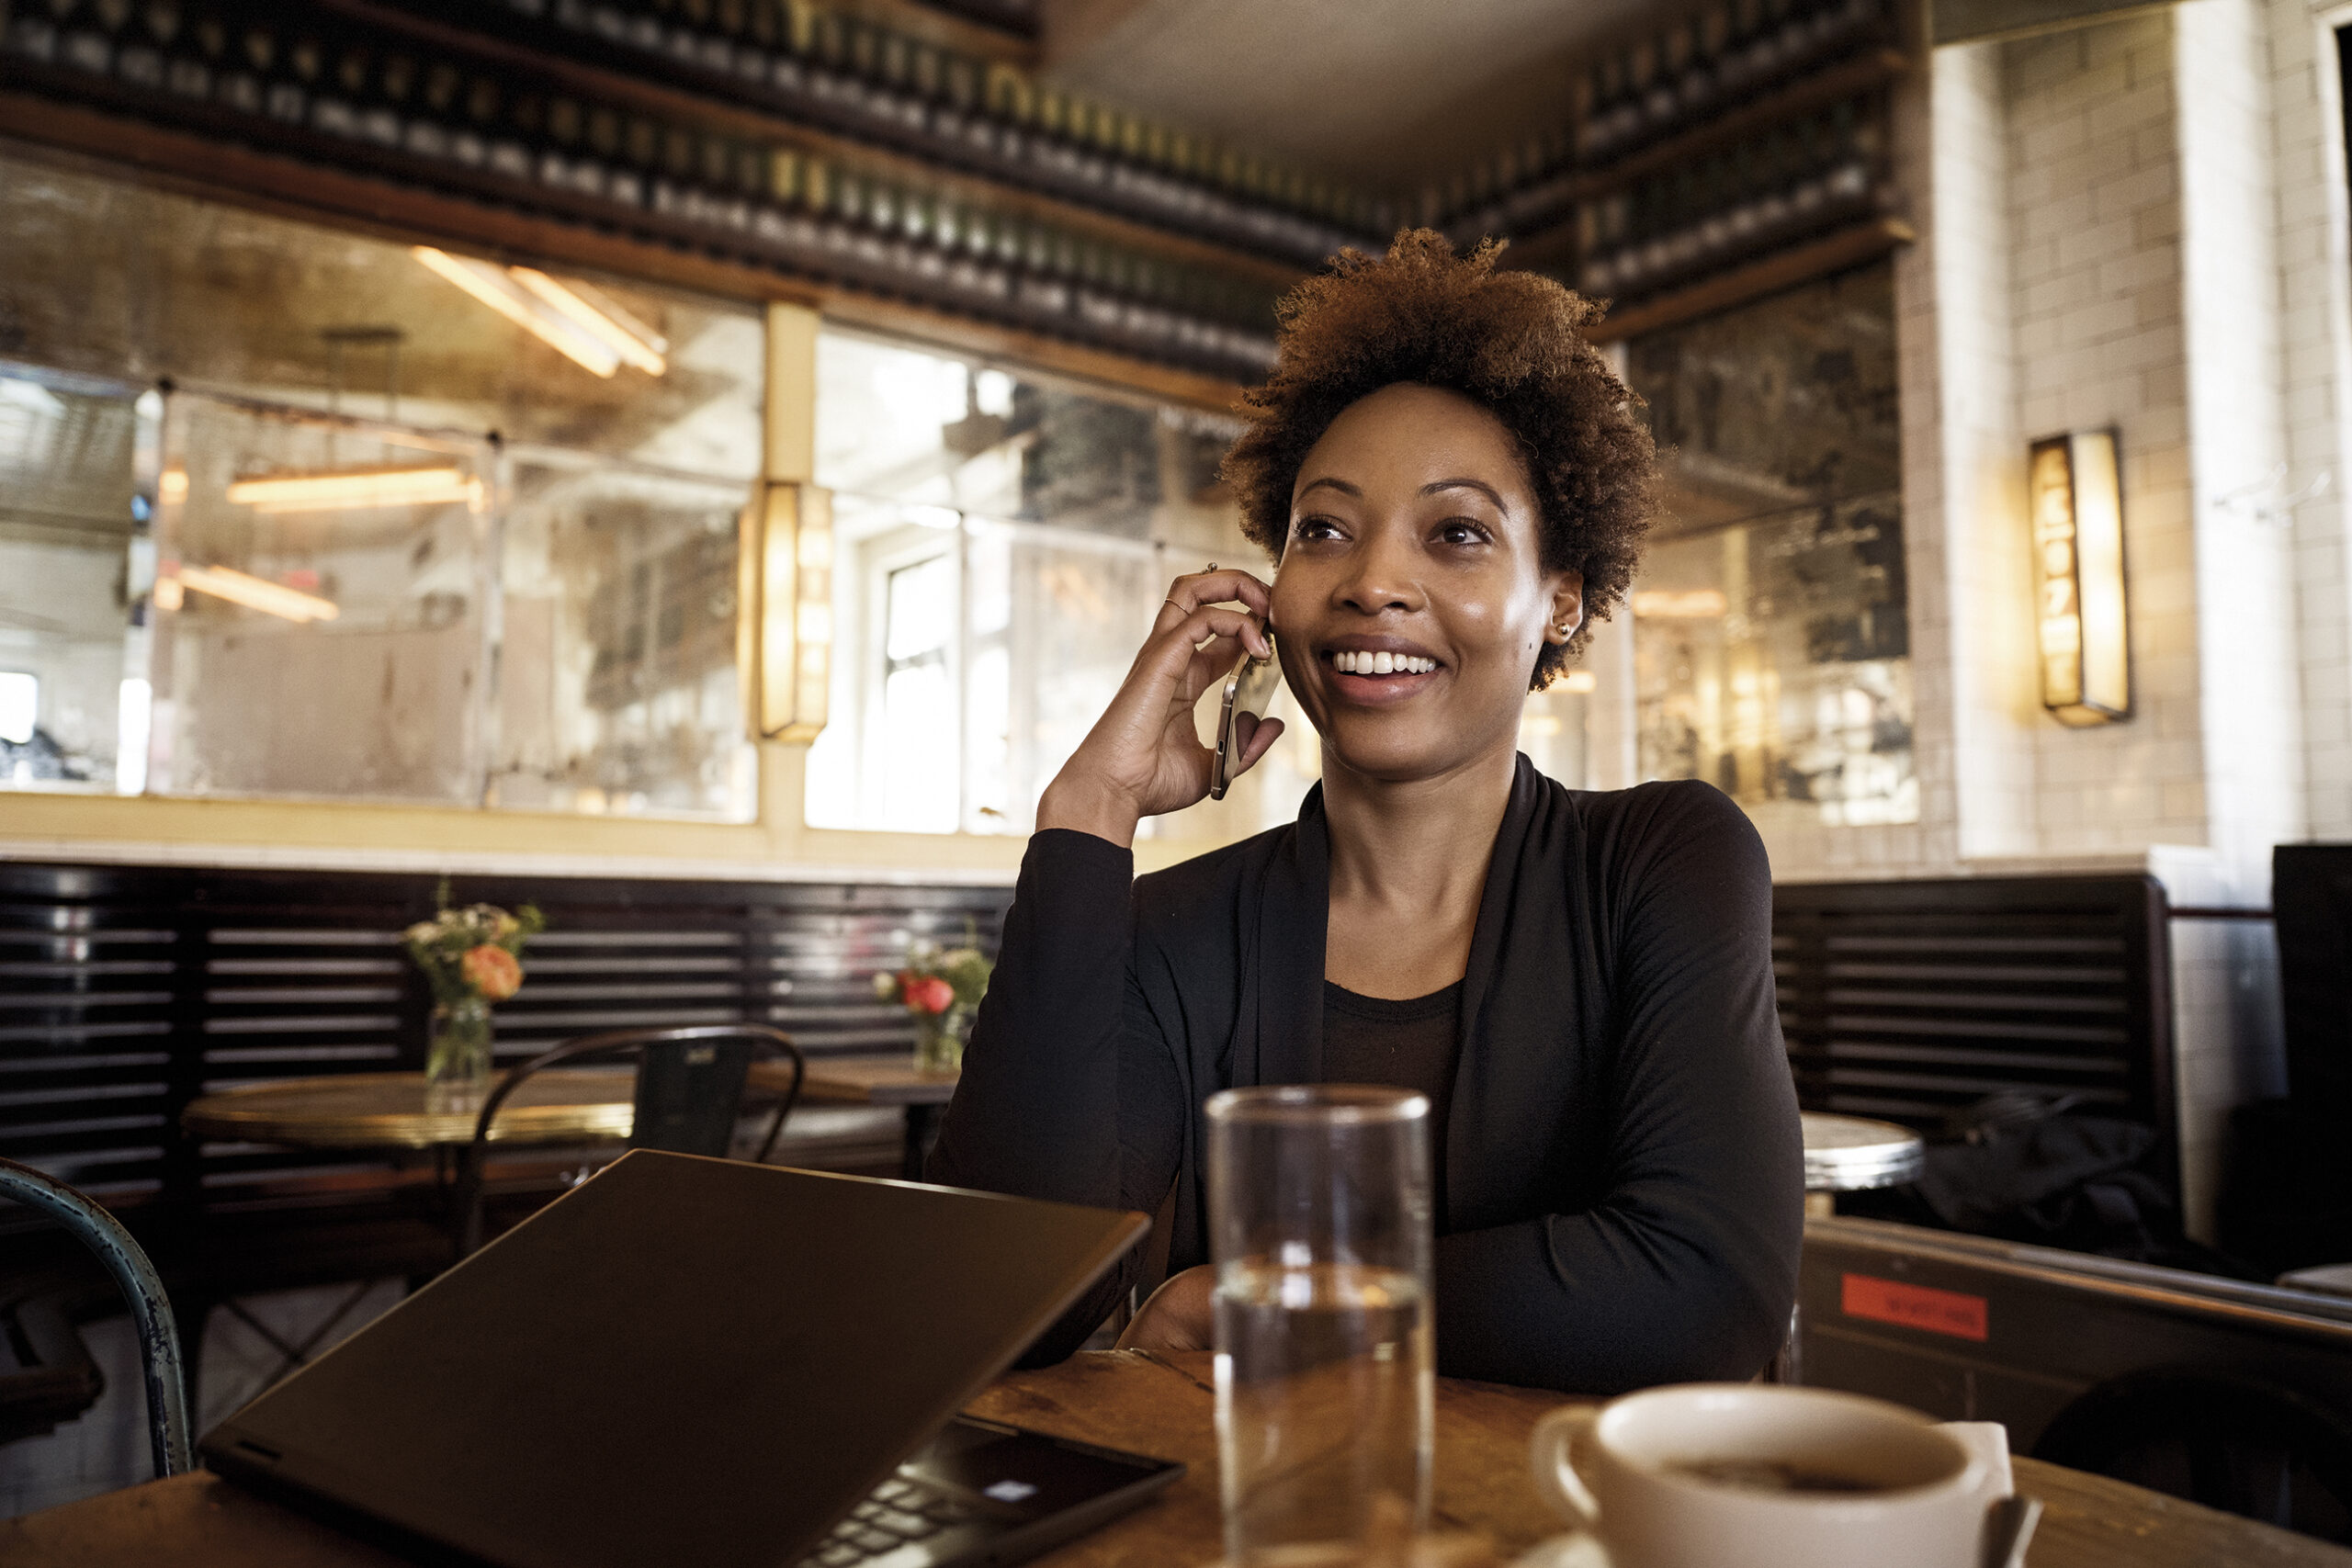 Photo of a young woman smiling while talking on the phone in a cafe.